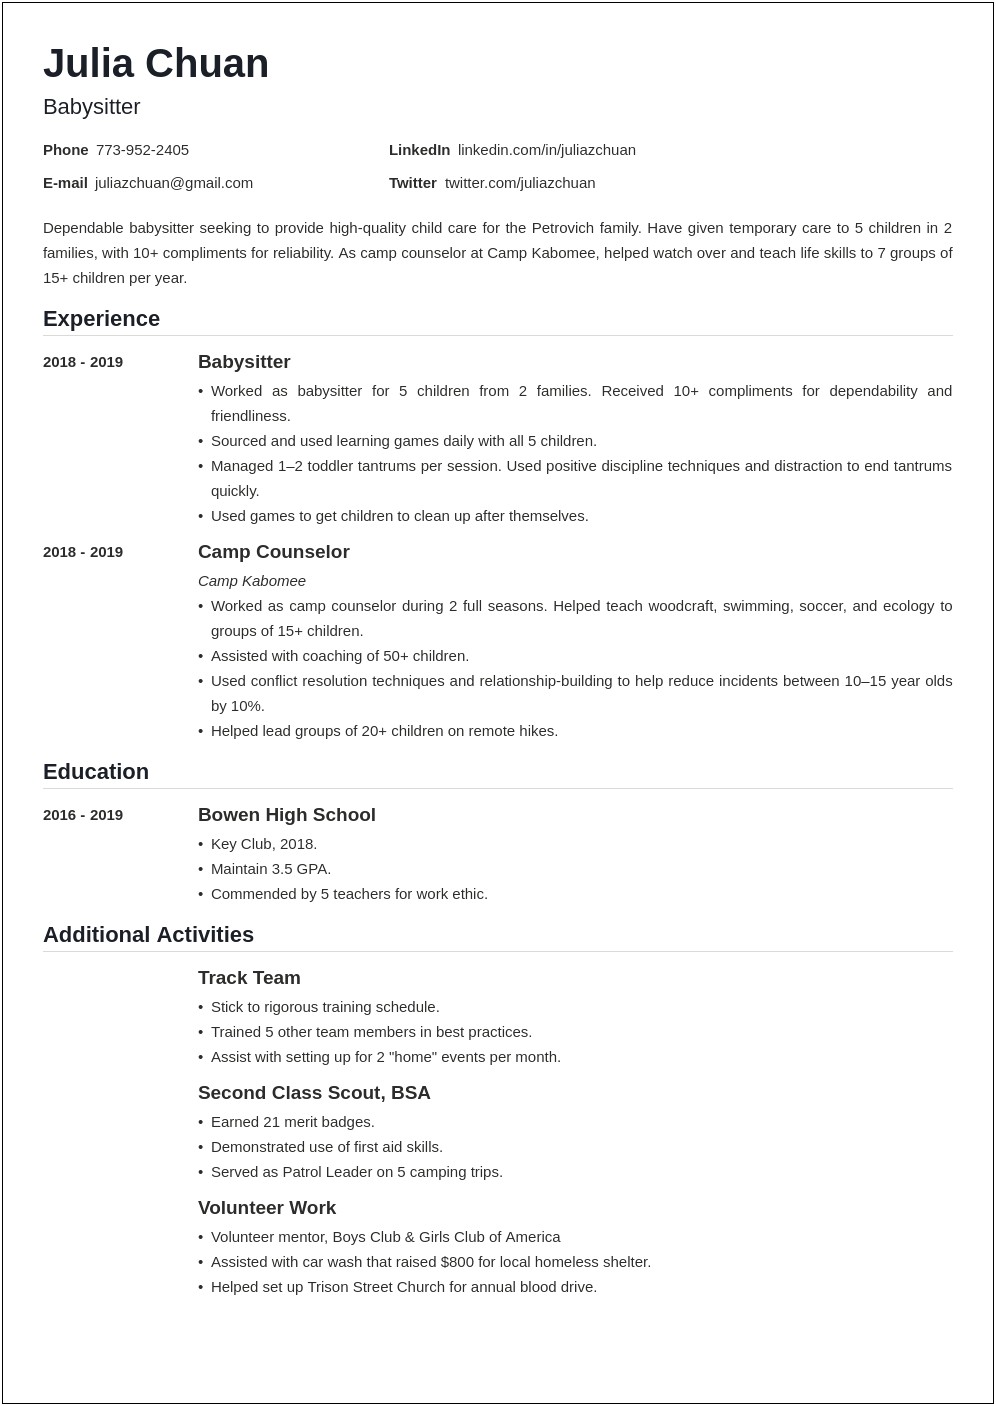 Resume With Volunteer Experience Example